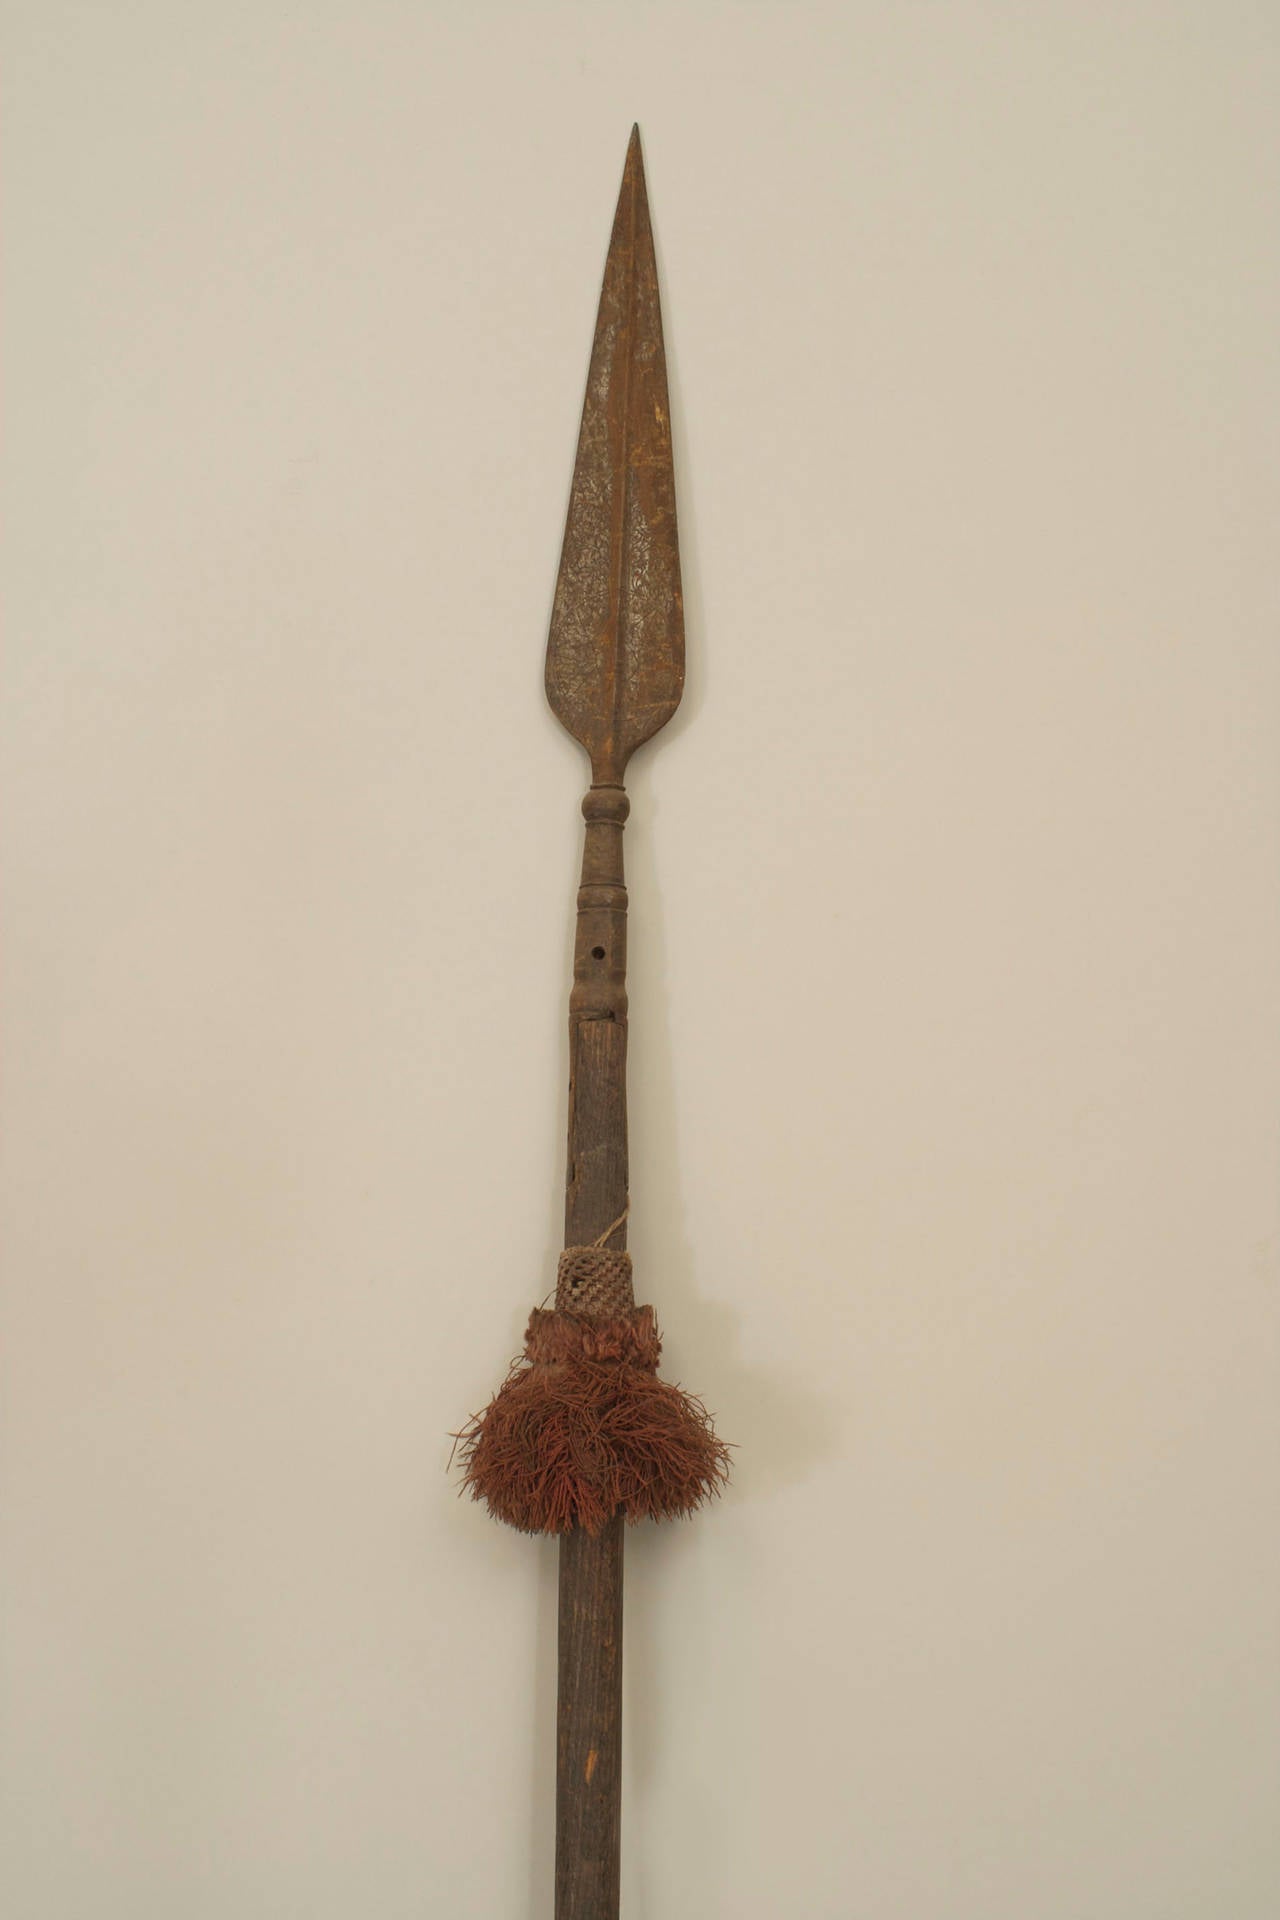 English Renaissance-style spear with wood shaft and etched iron blade with tassel.
